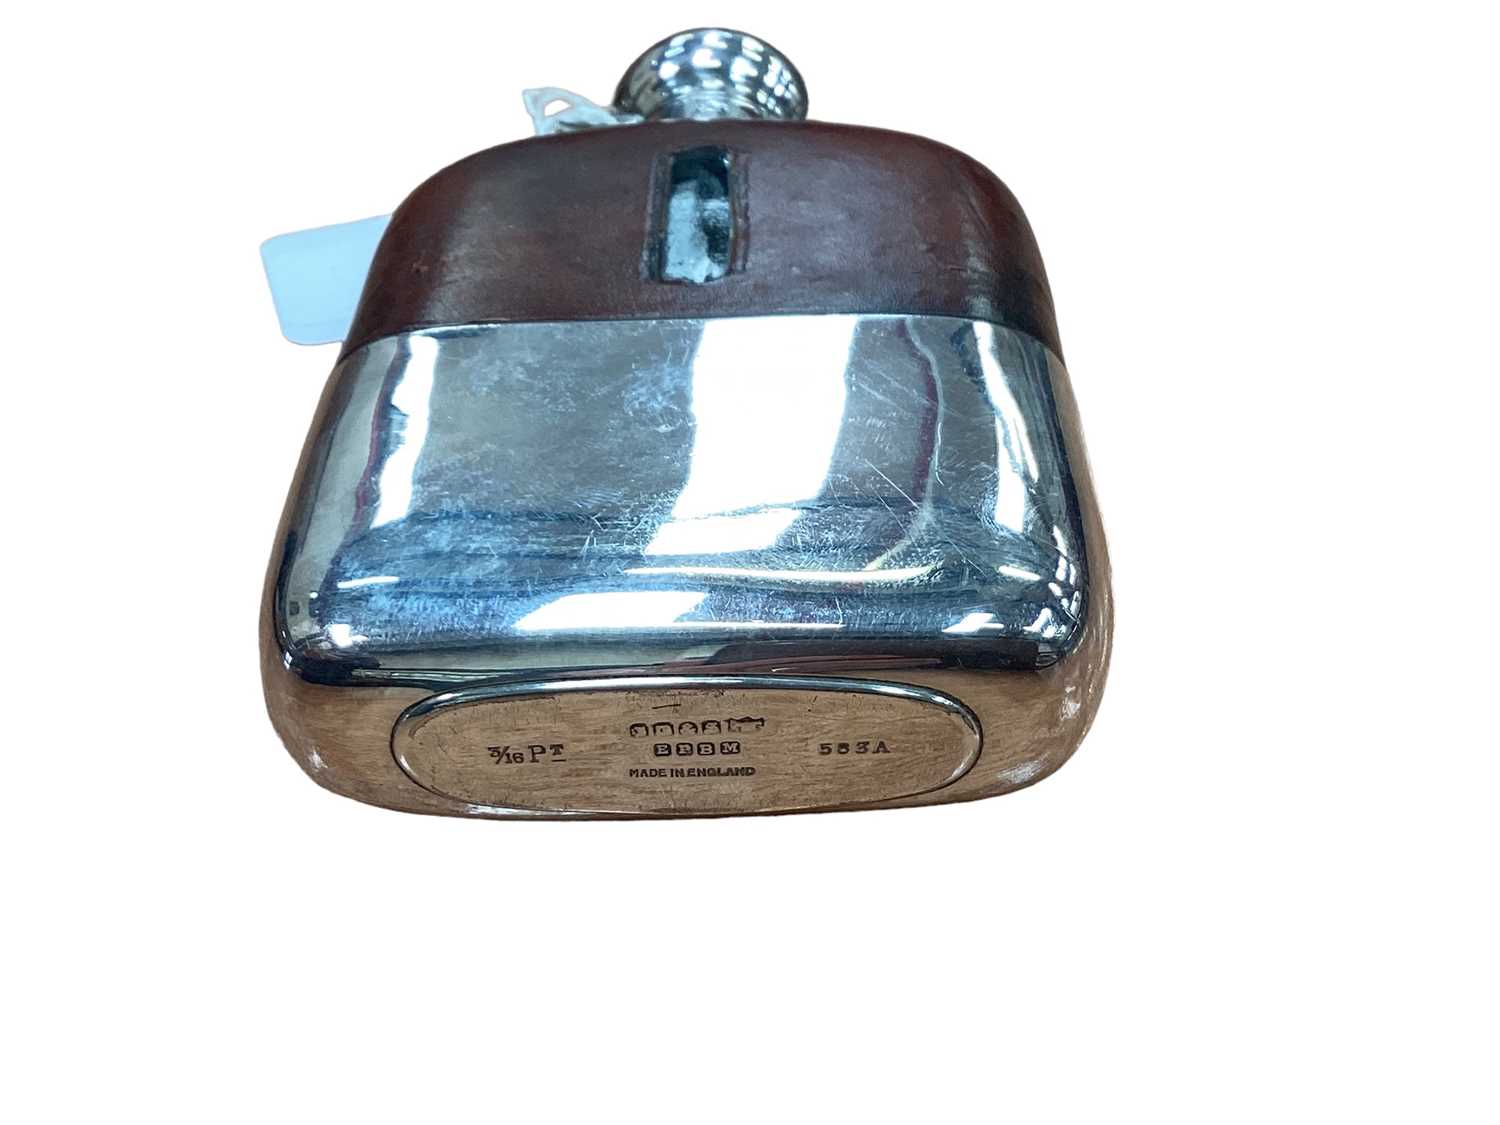 Early 20th century silver plated sandwich box by James Dixon & Sons in a brown leather case, togethe - Image 2 of 3